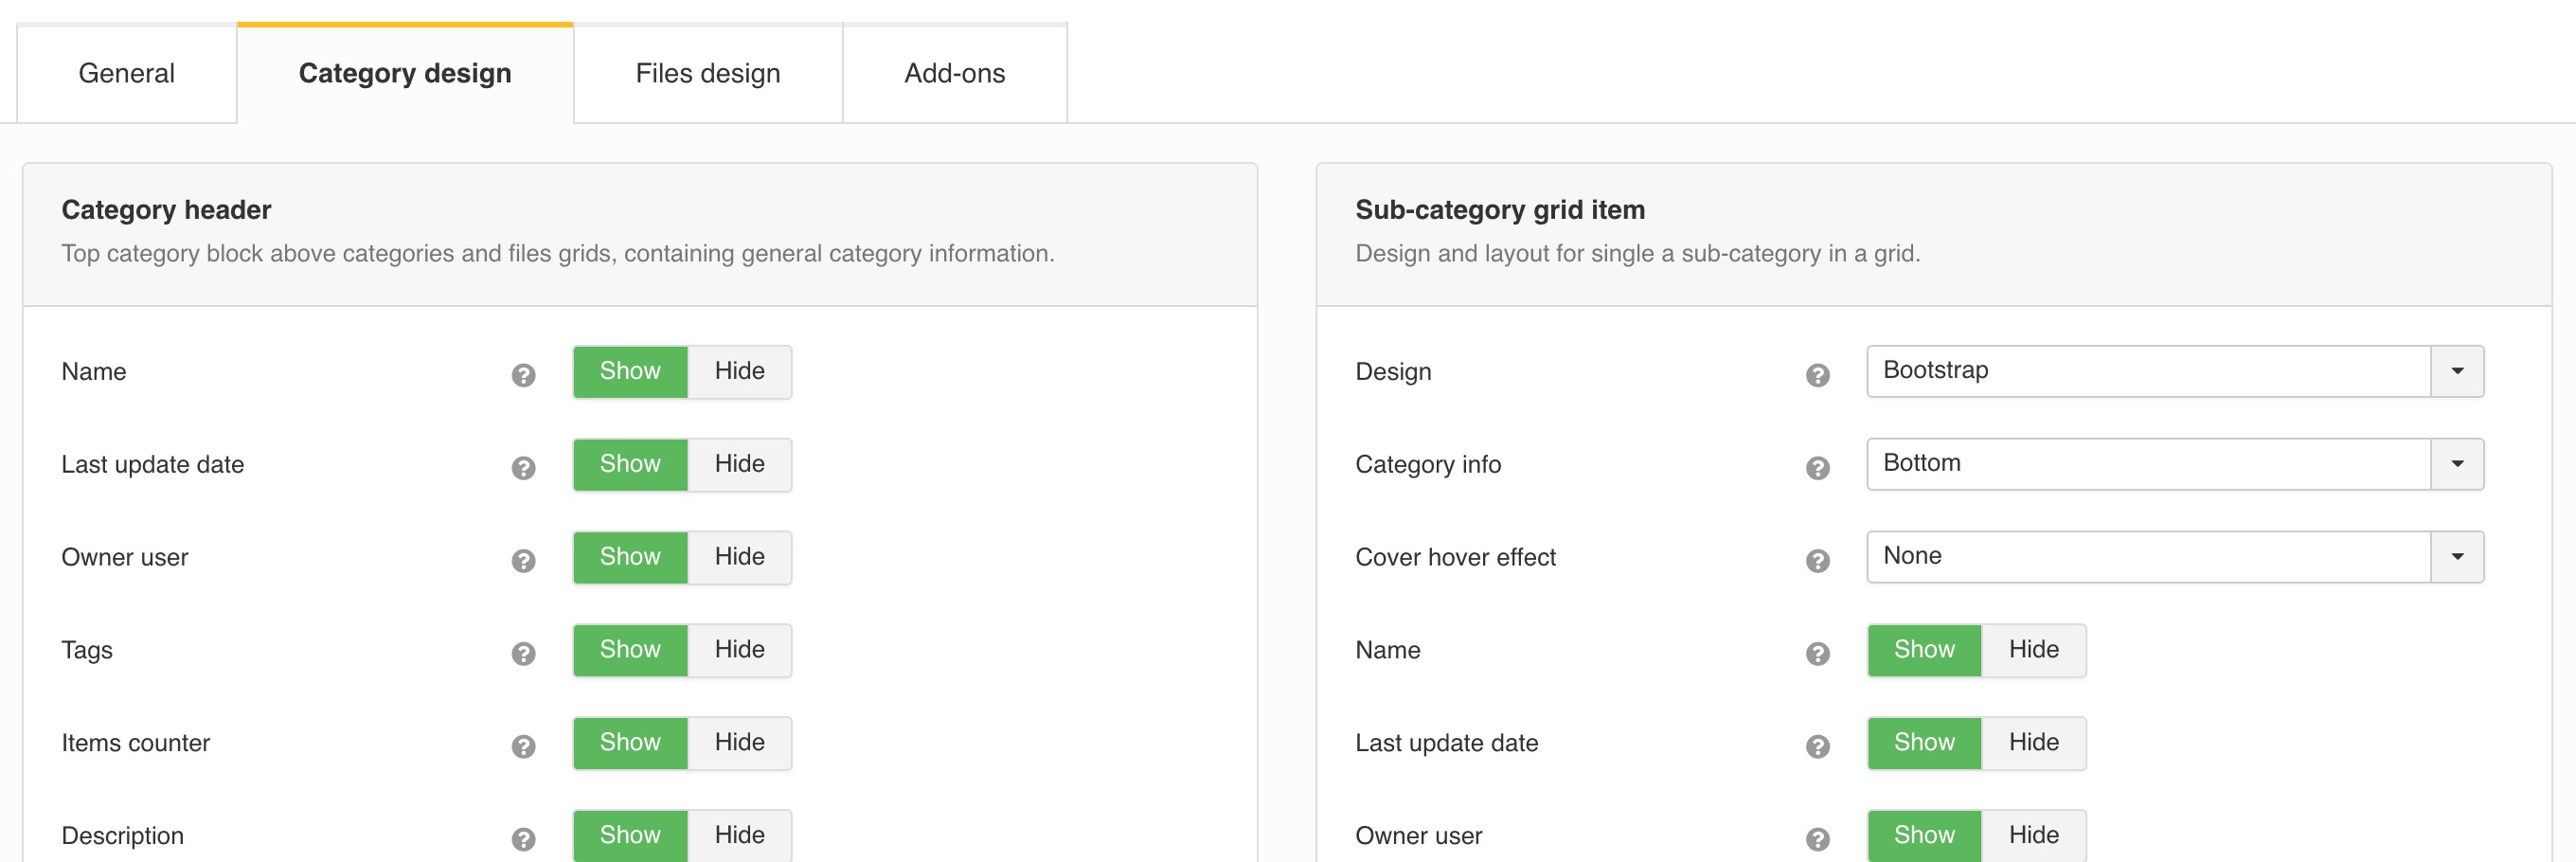 Category header, sub-categories grid and grid item paratemers.